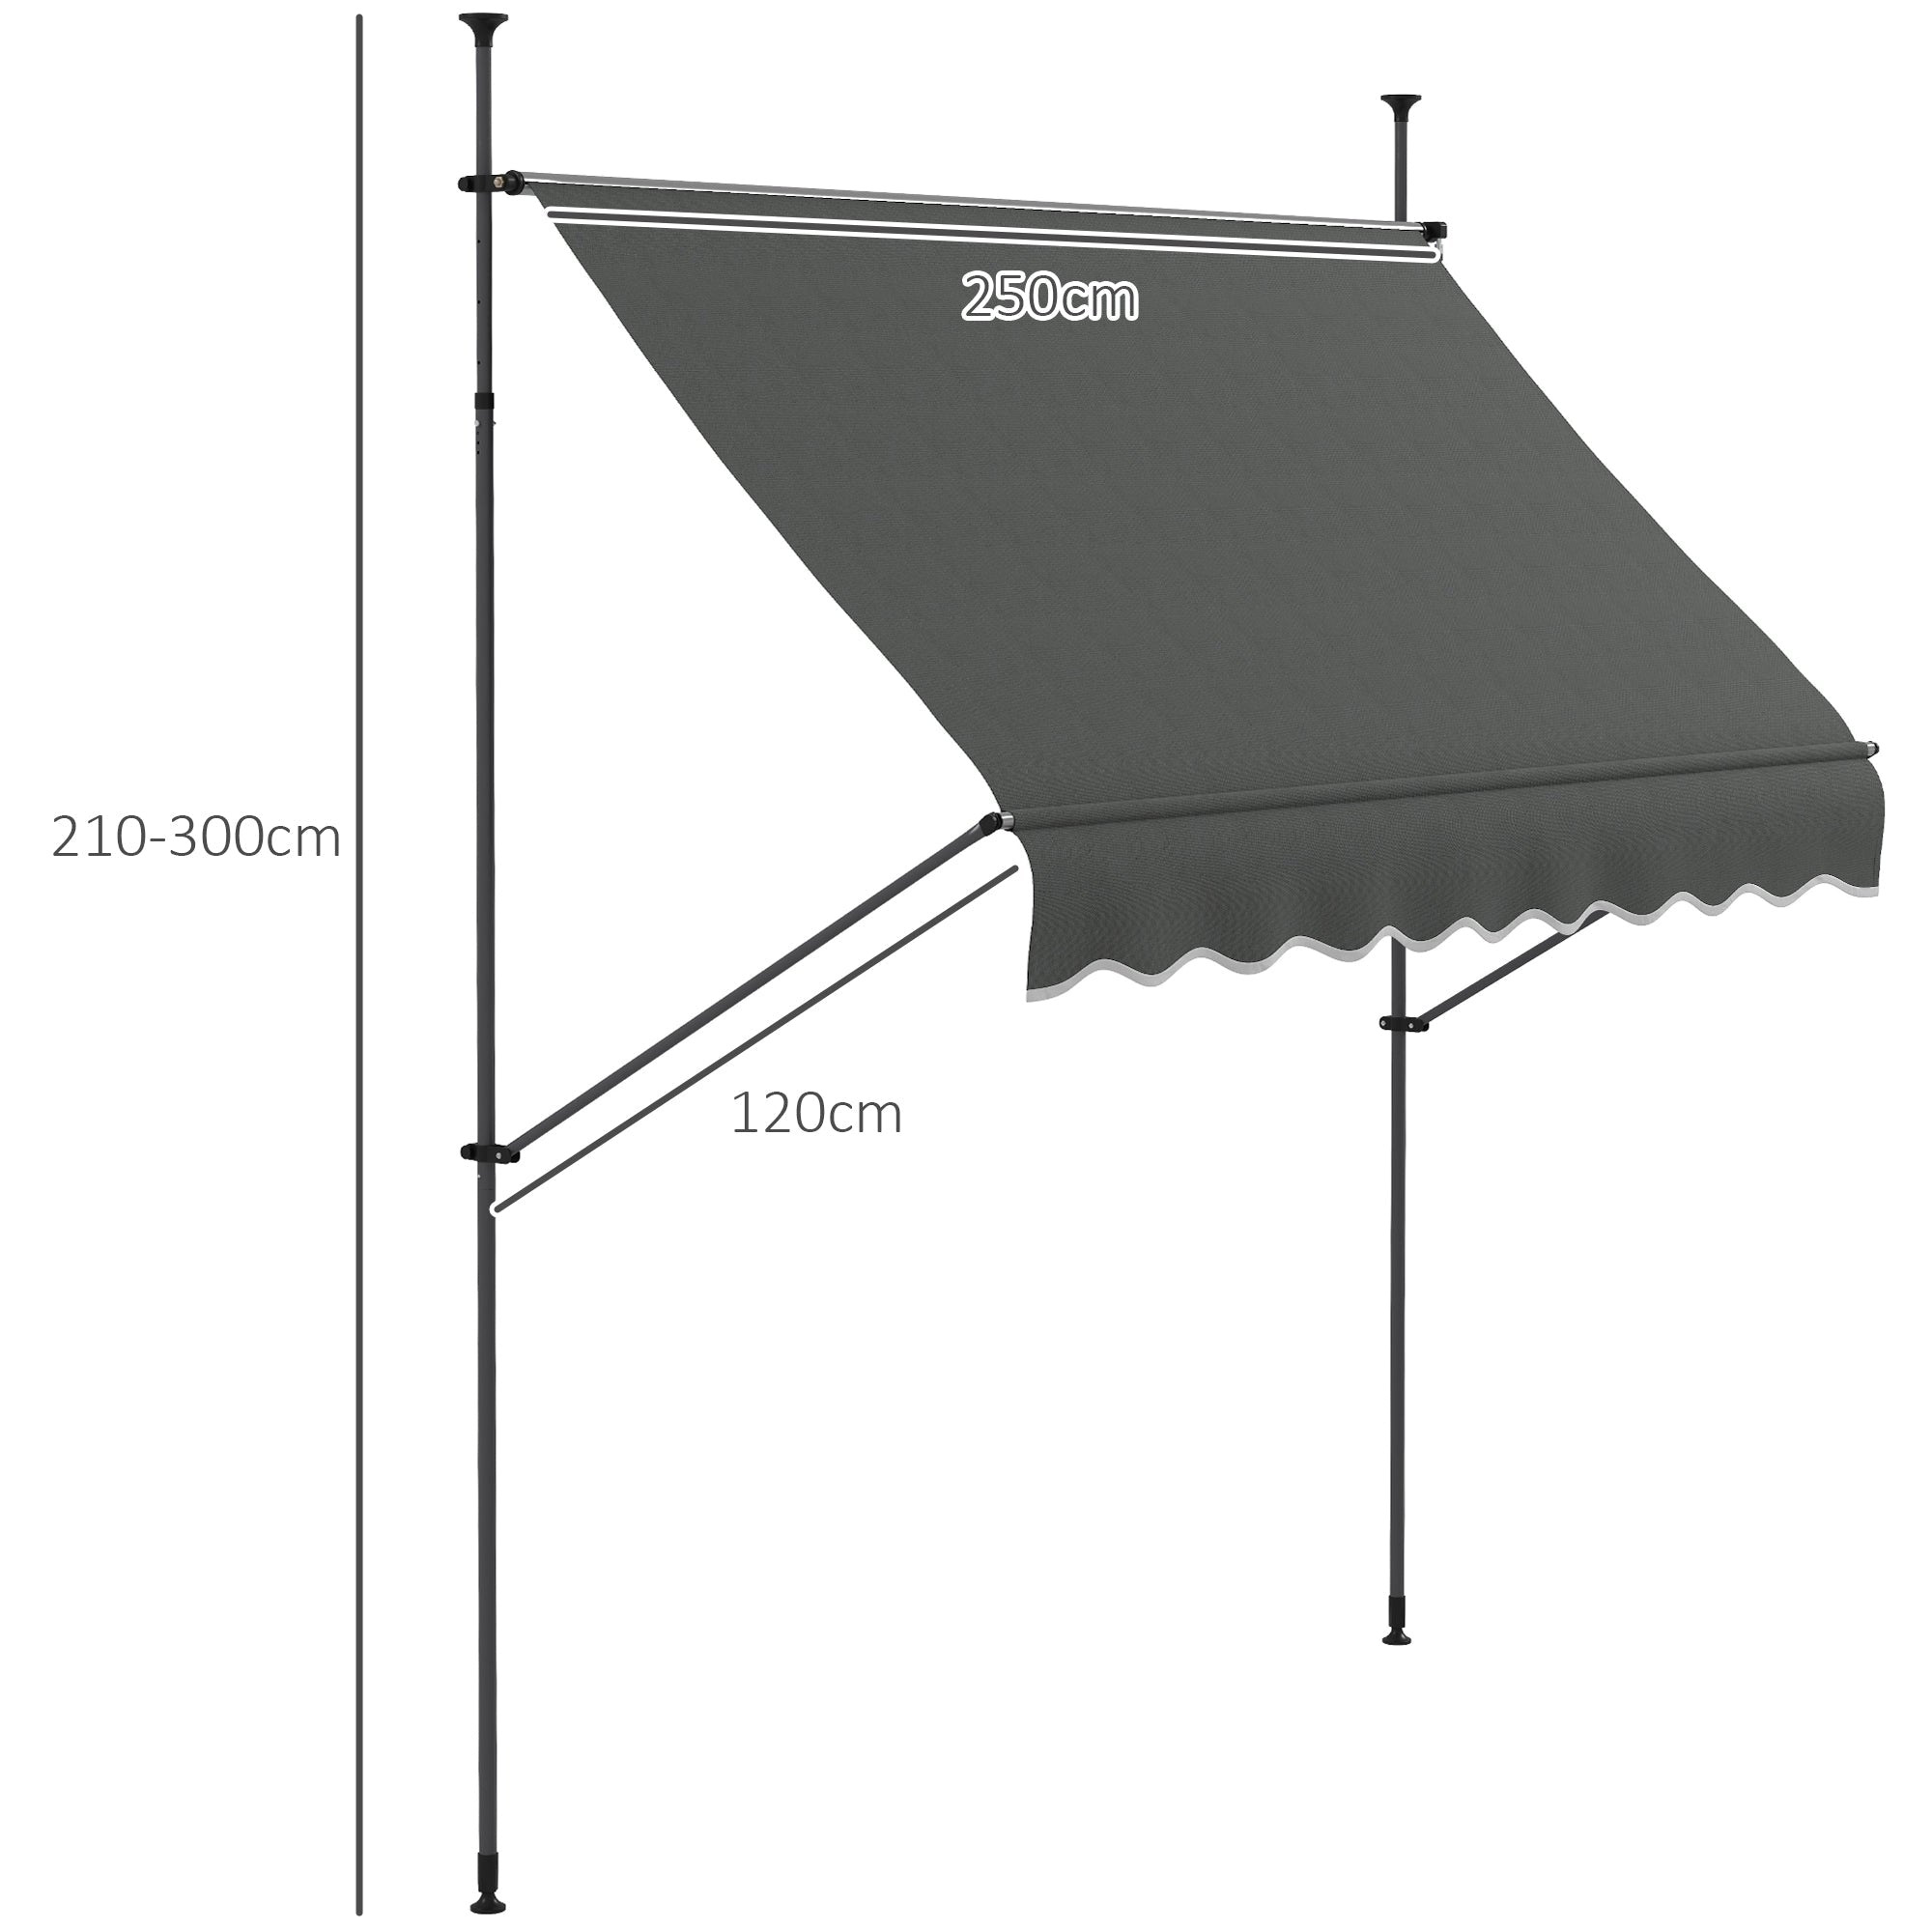 2.5 x 1.2m Retractable Awning, Free Standing Patio Sun Shade Shelter, UV Resistant, for Window and Door, Dark Grey-2